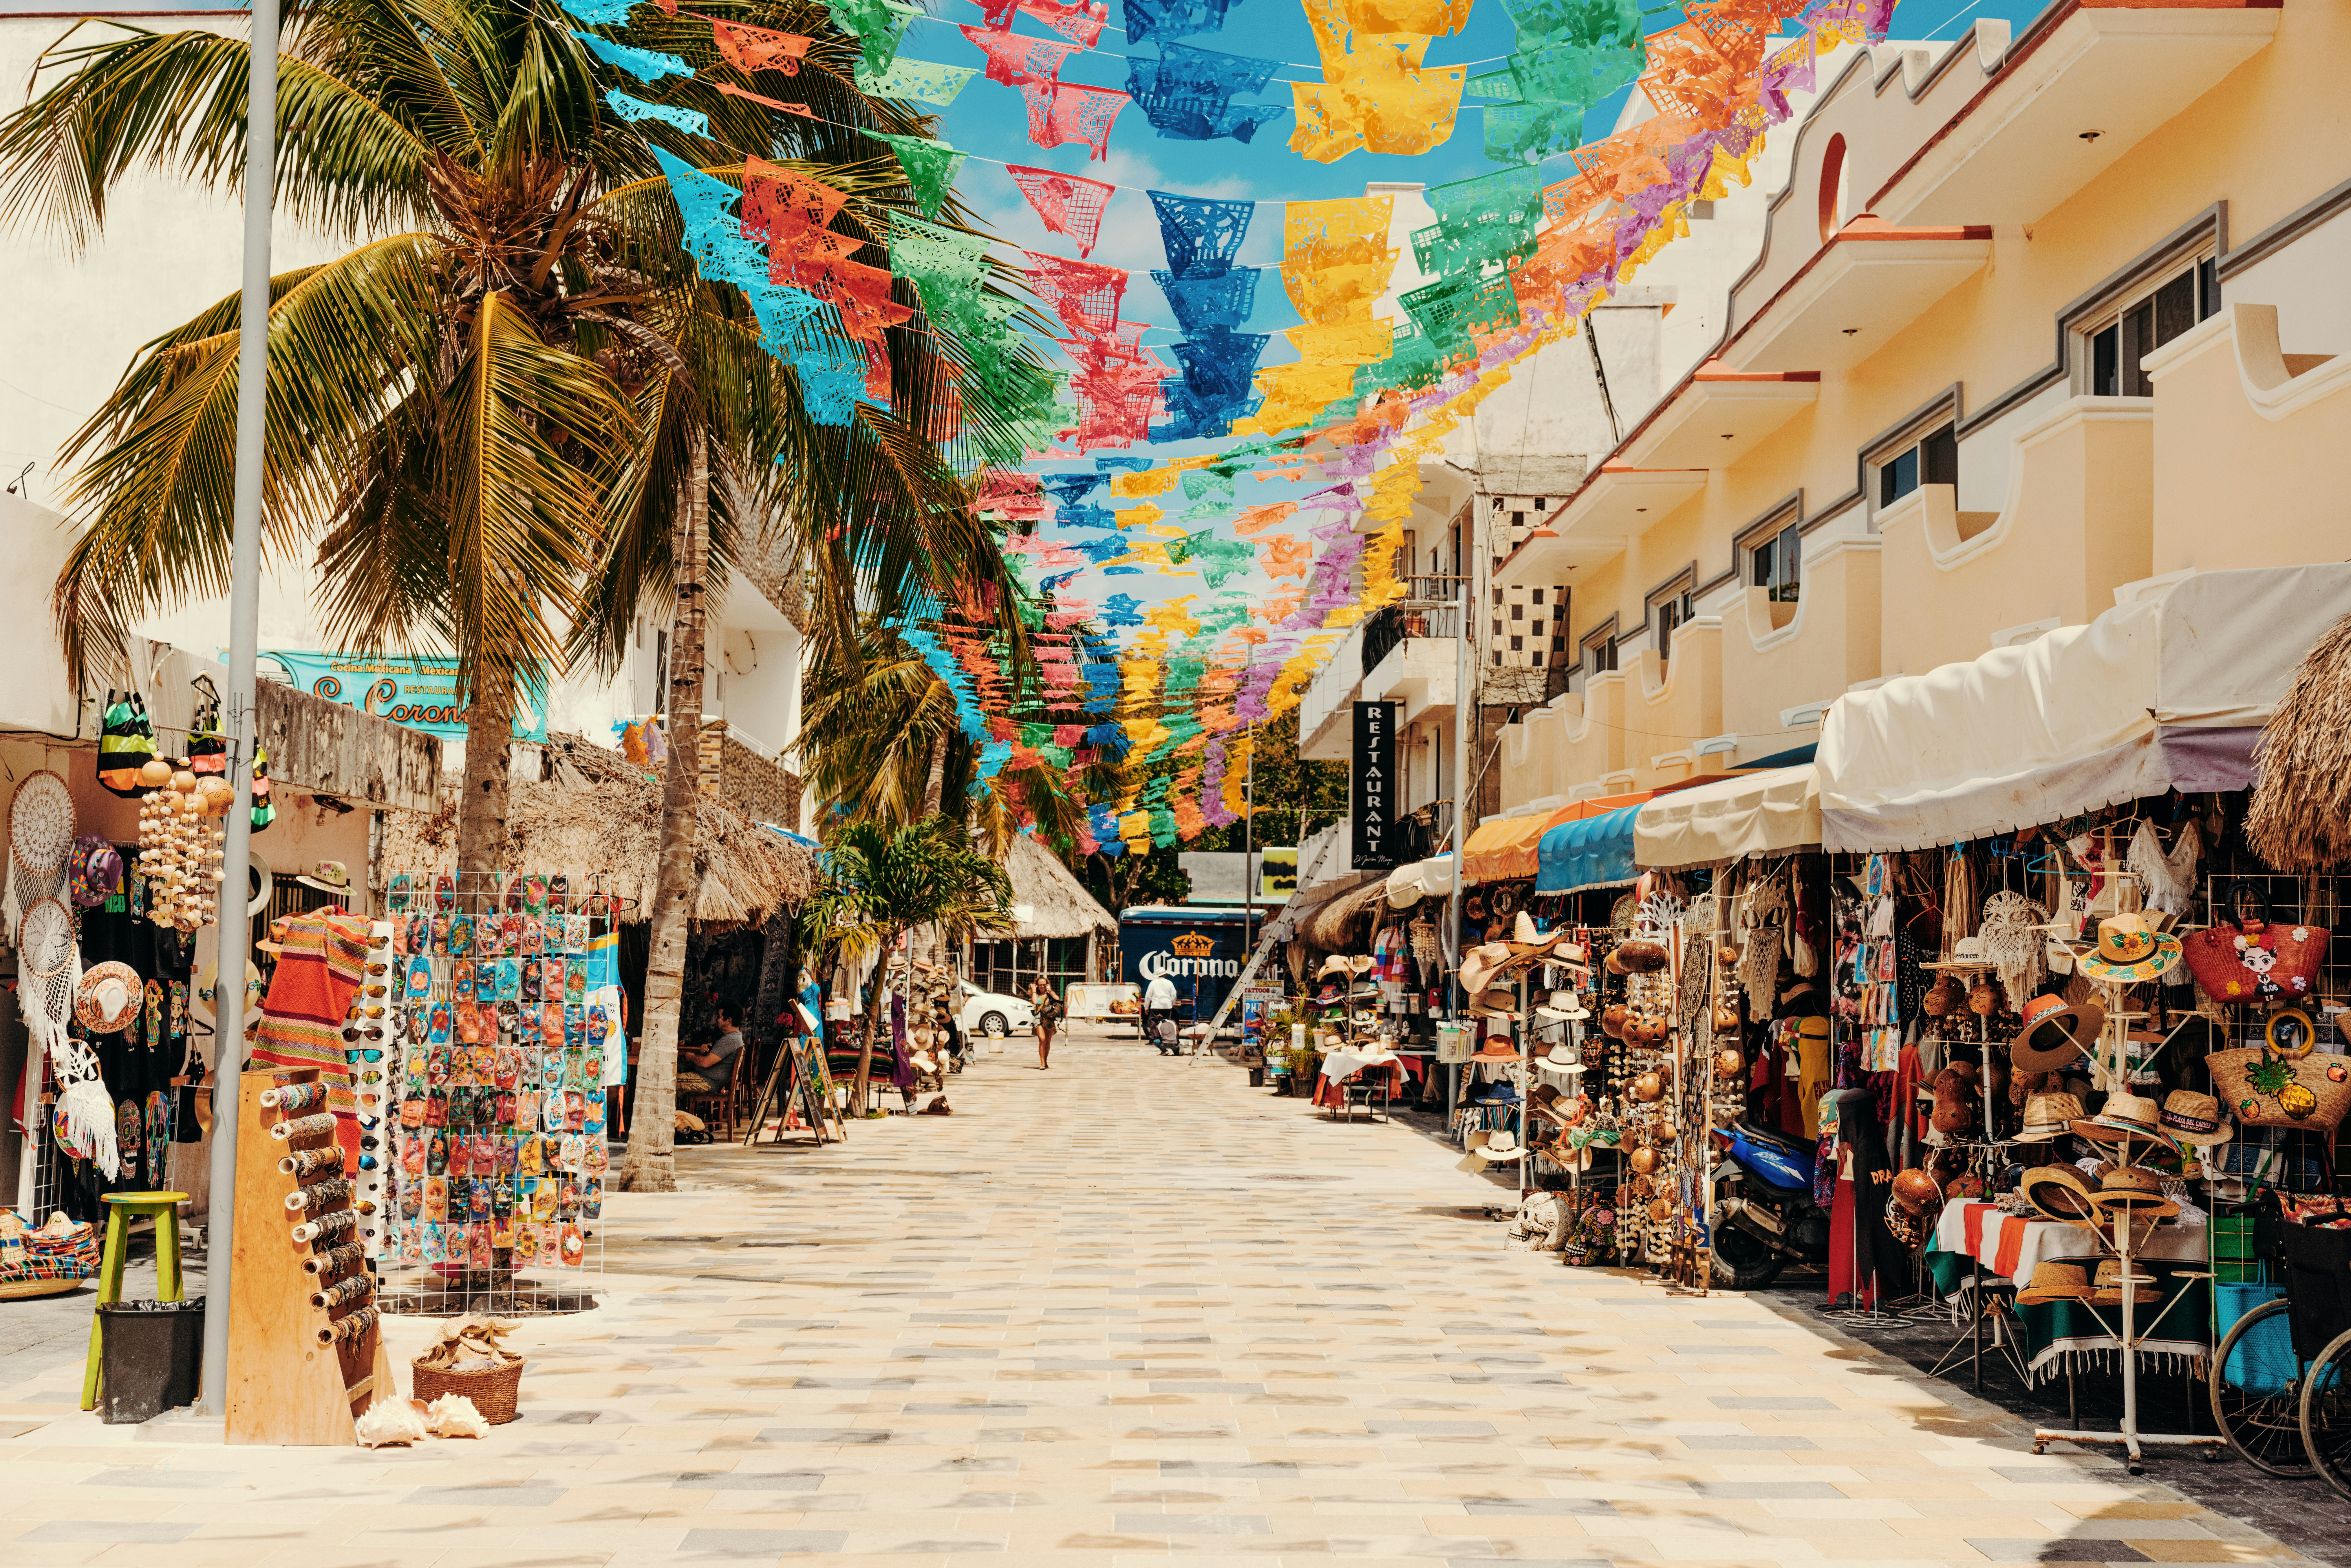 Cozumel is an island that offers a safe haven for travelers that do not want the buzz of other Mexican destinations.
pictured: A street in Cozumel filled with street vendors and shops 